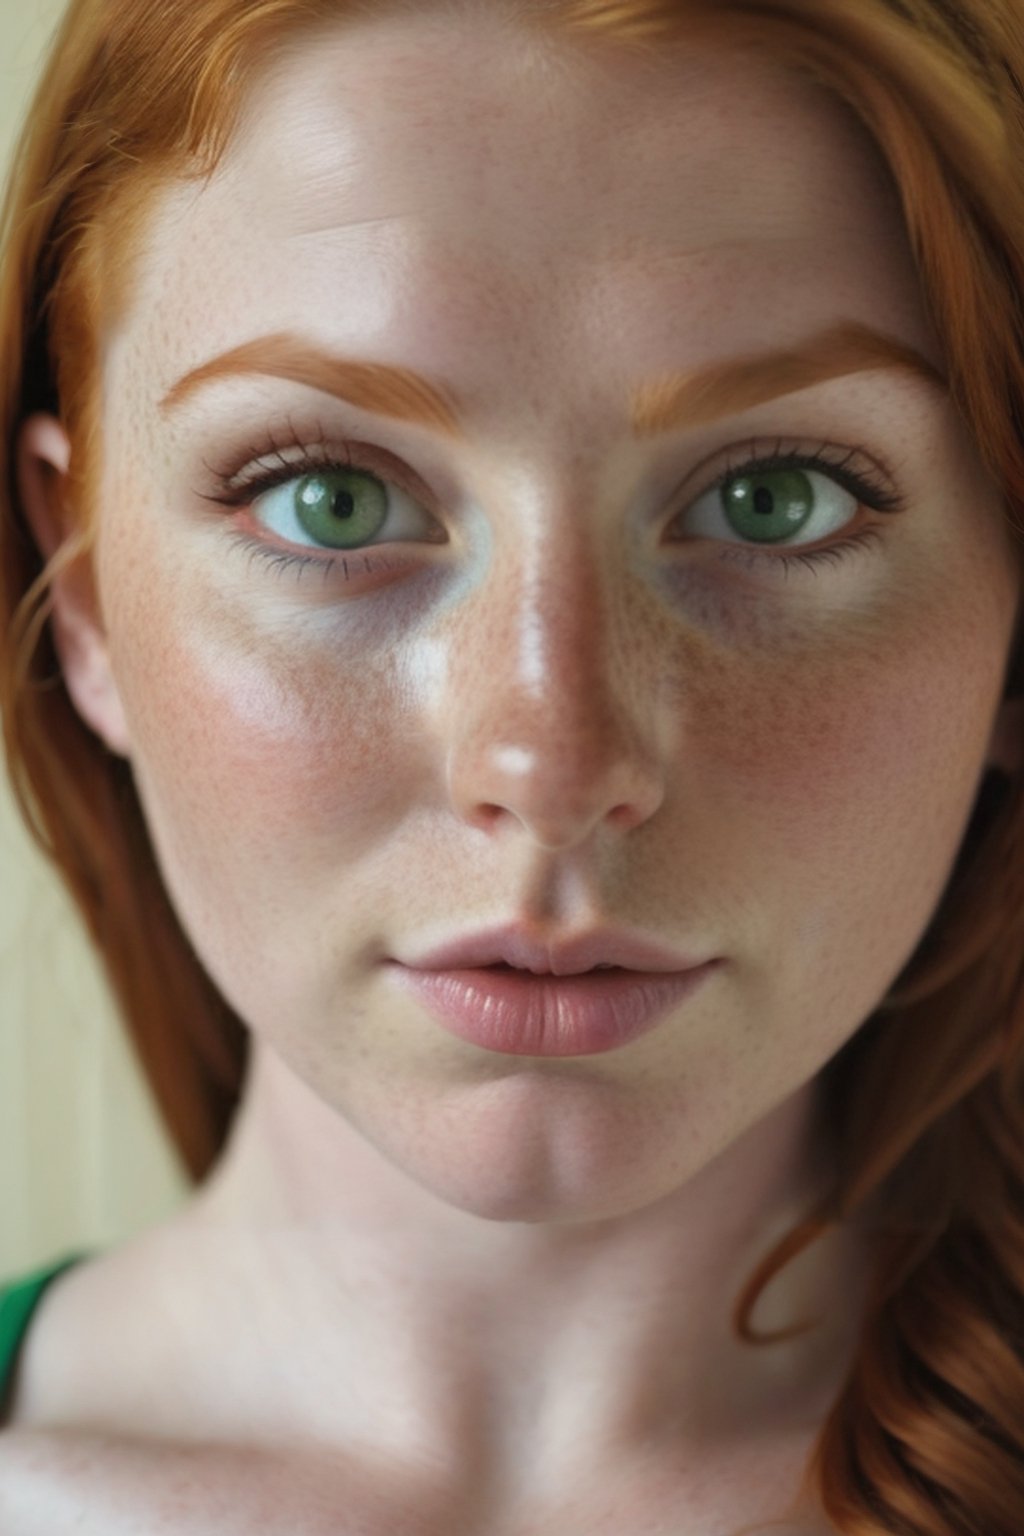 big boobies woman, green eyes, button nose, ginger hair, freckles, round lips, round face, doe eyes